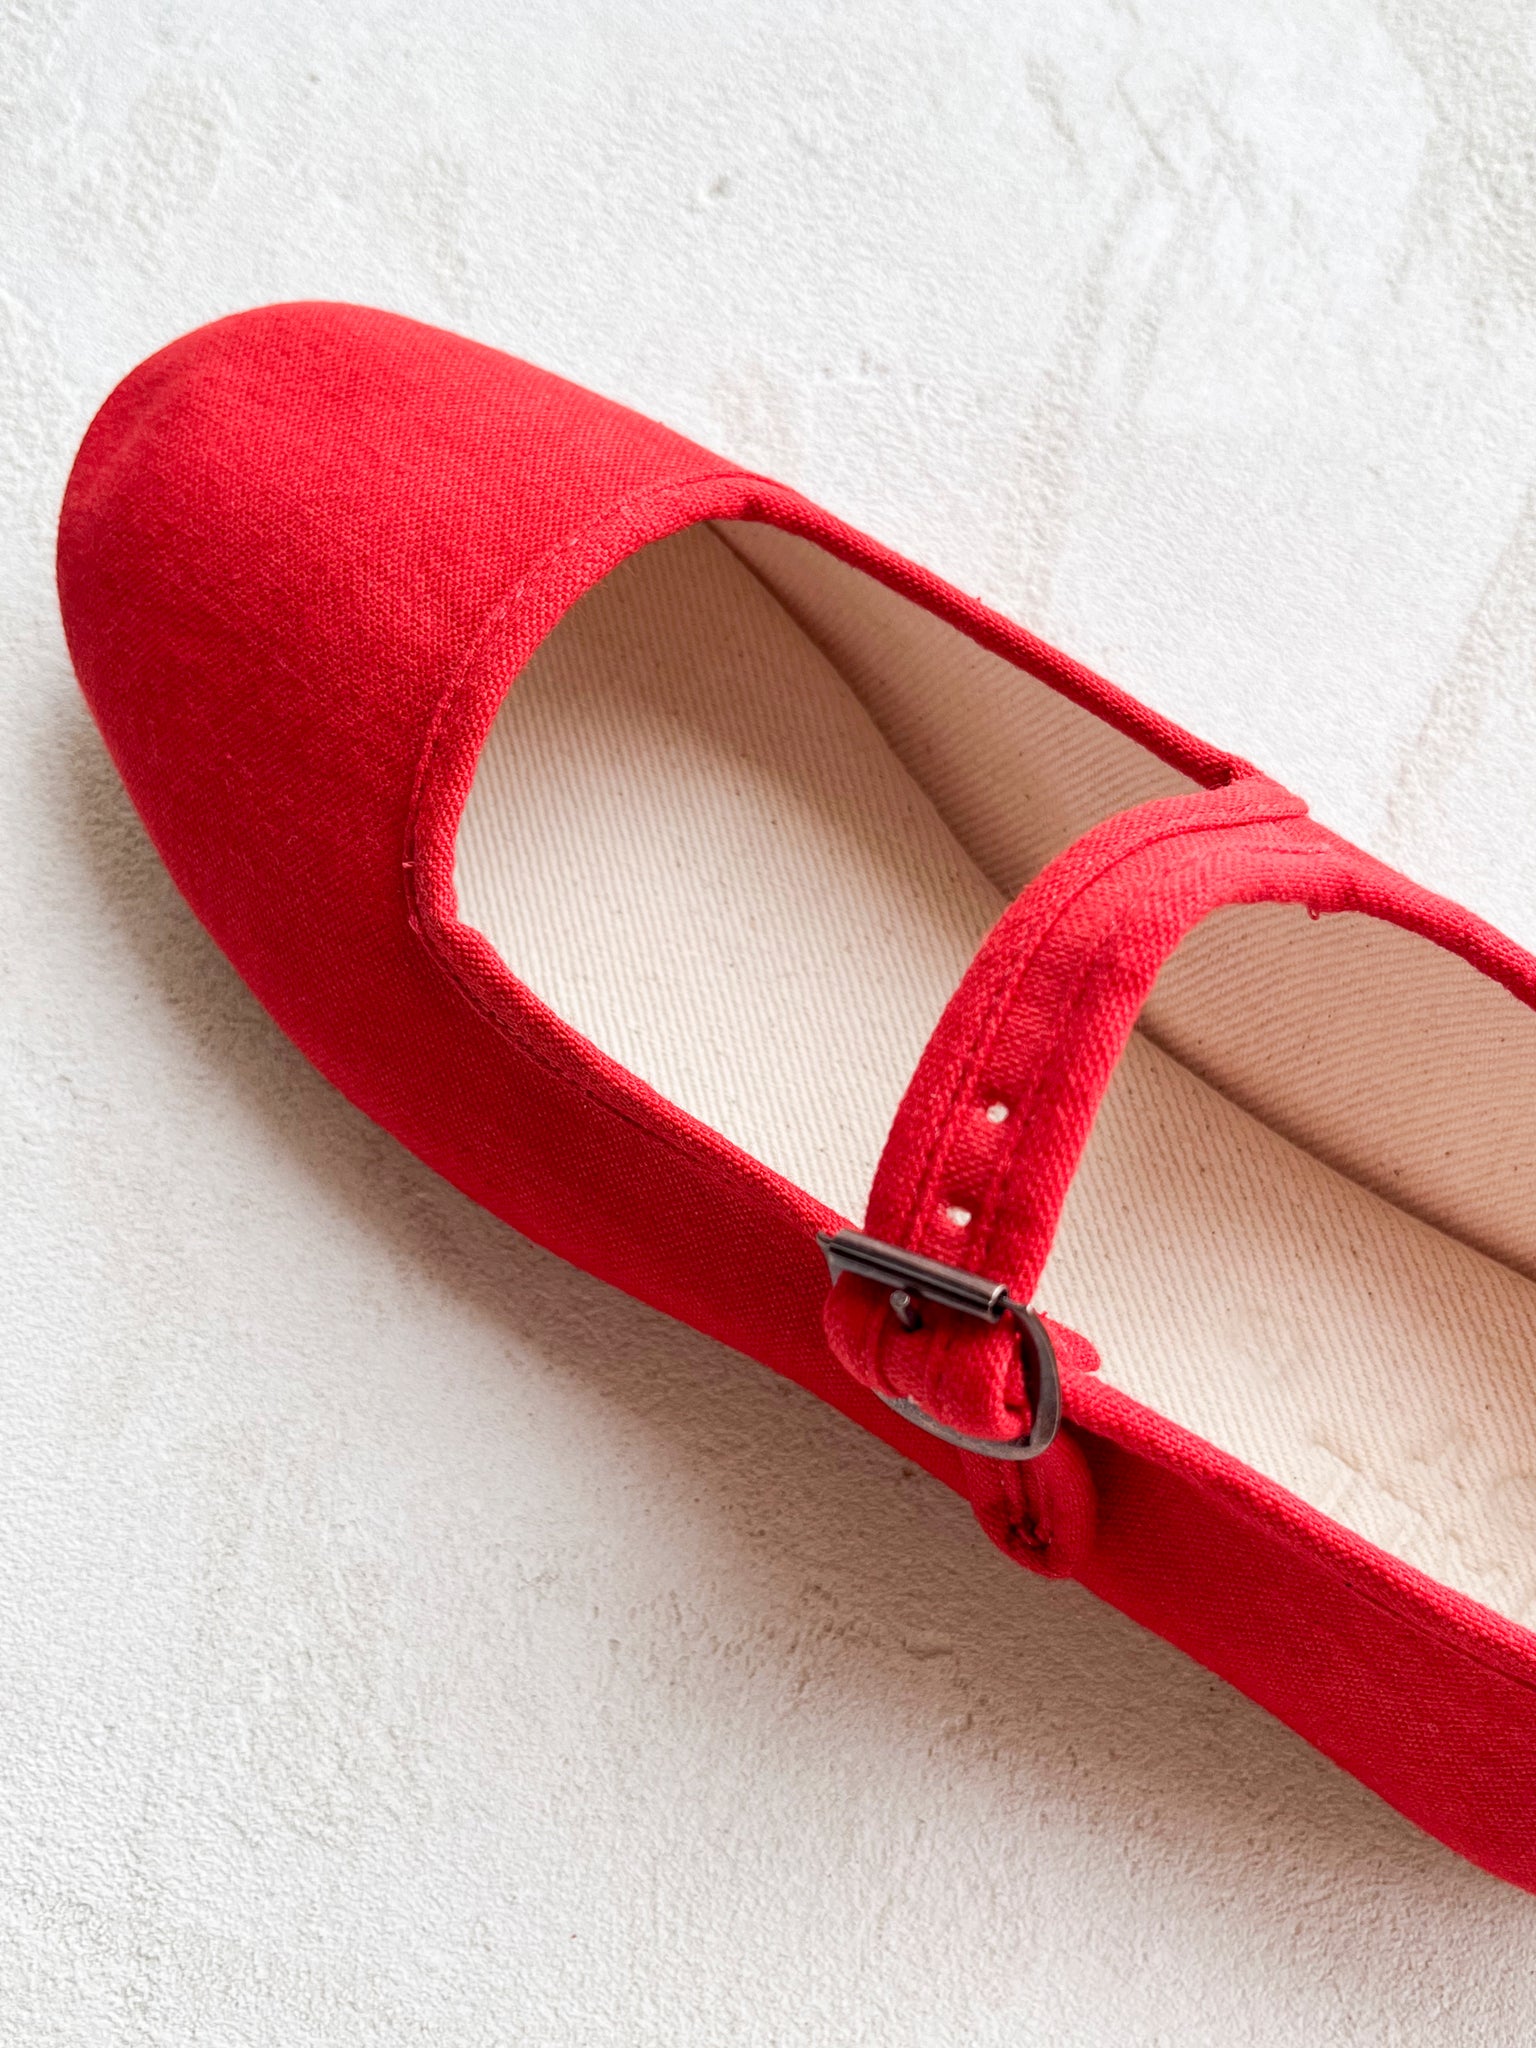 Classic Mary Janes | Red